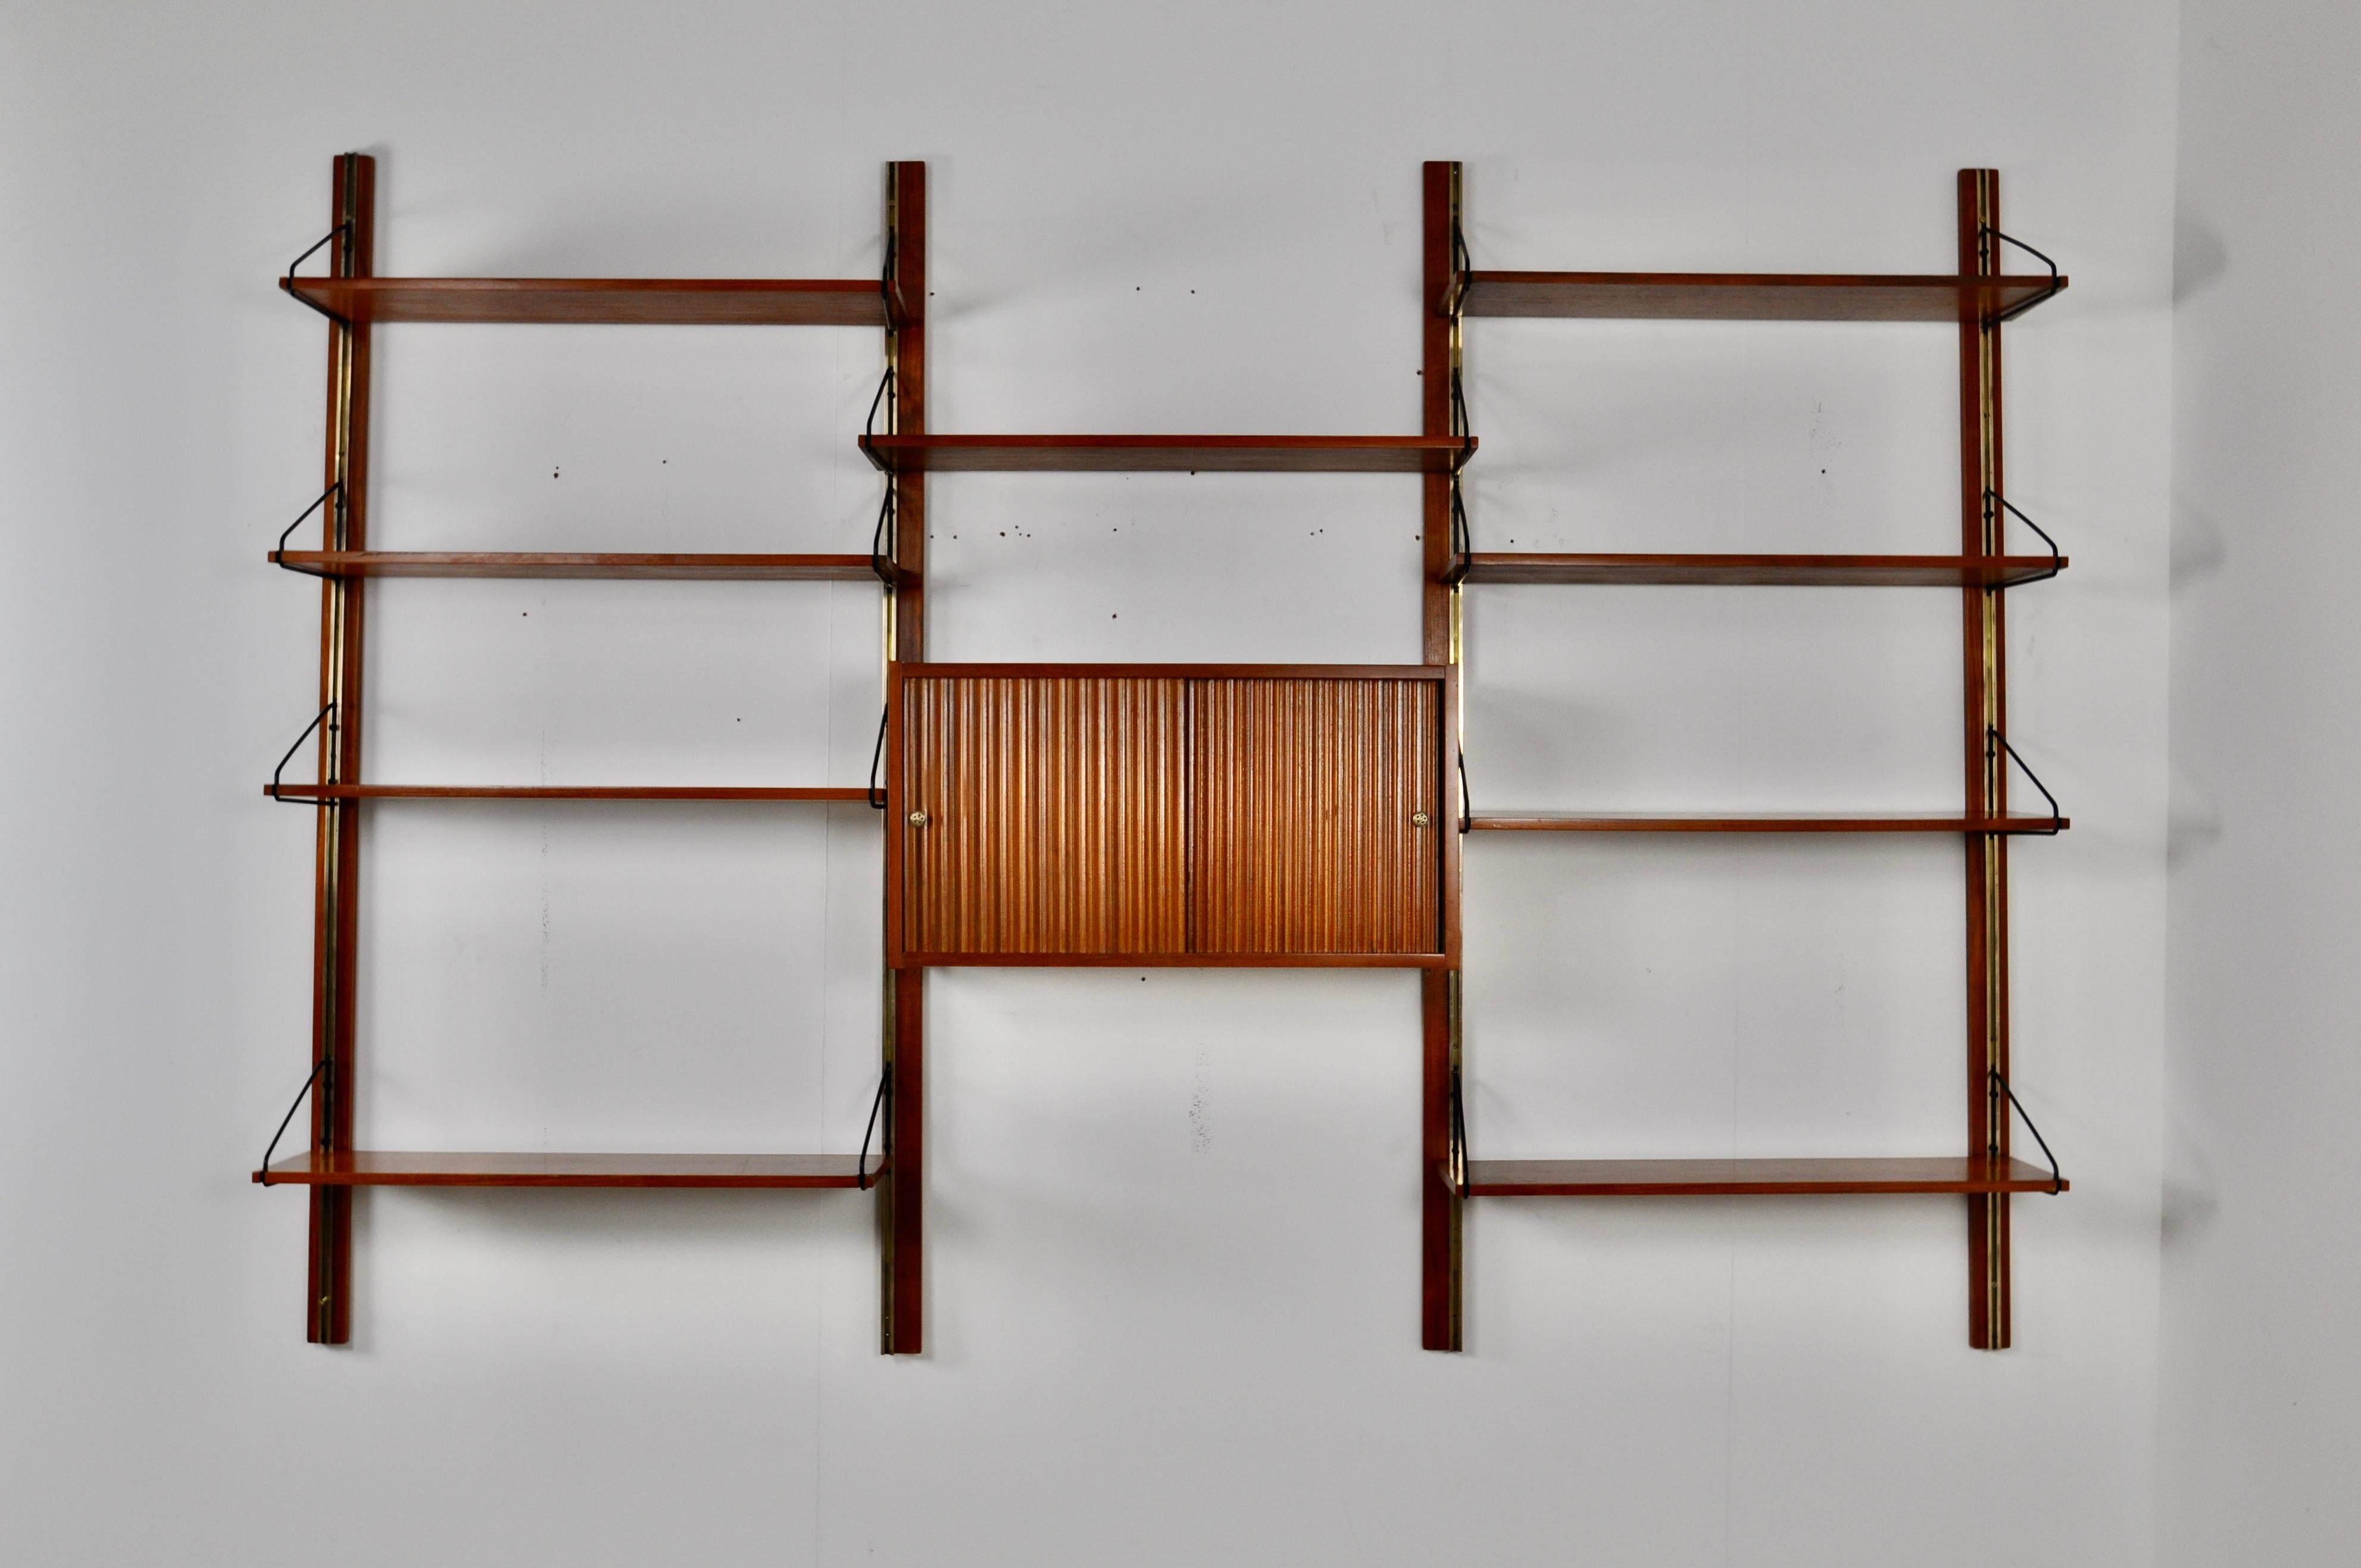 Wall unit composed of 9 boards, 4 posts and 1 box. Wear due to time and age of the wall unit.